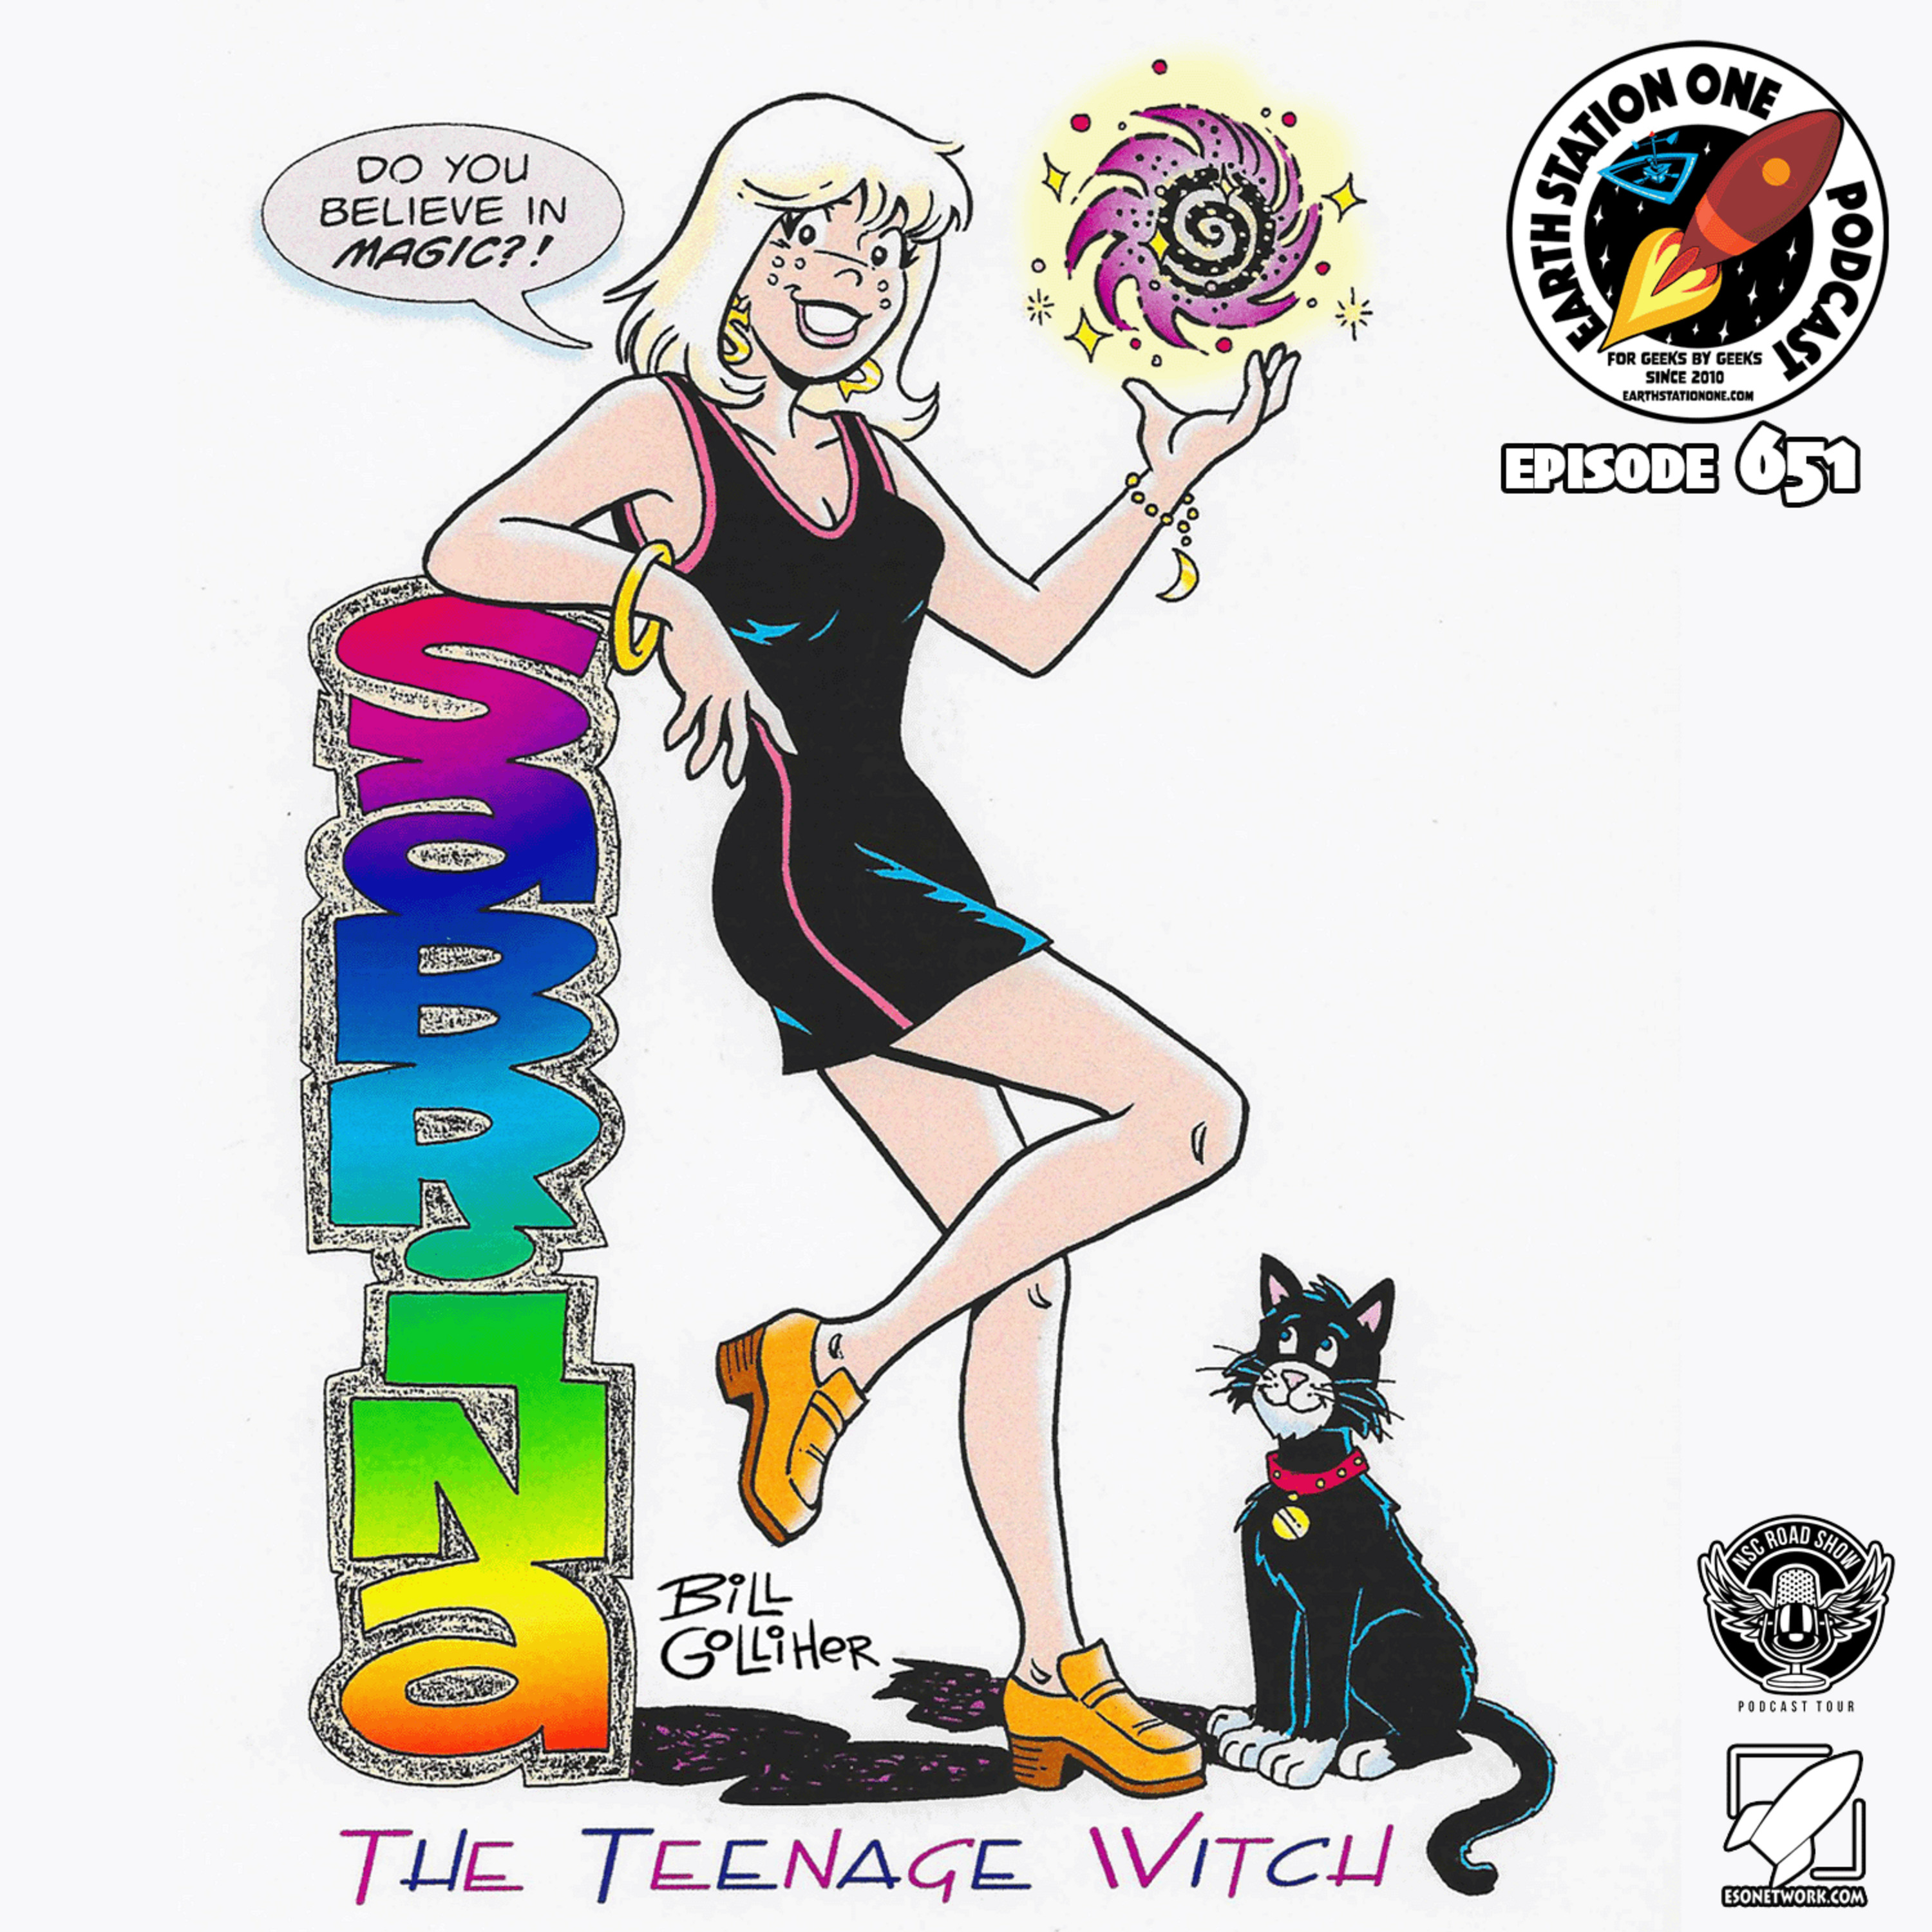 The Earth Station One Podcast - Sabrina The Teenage Witch At 60